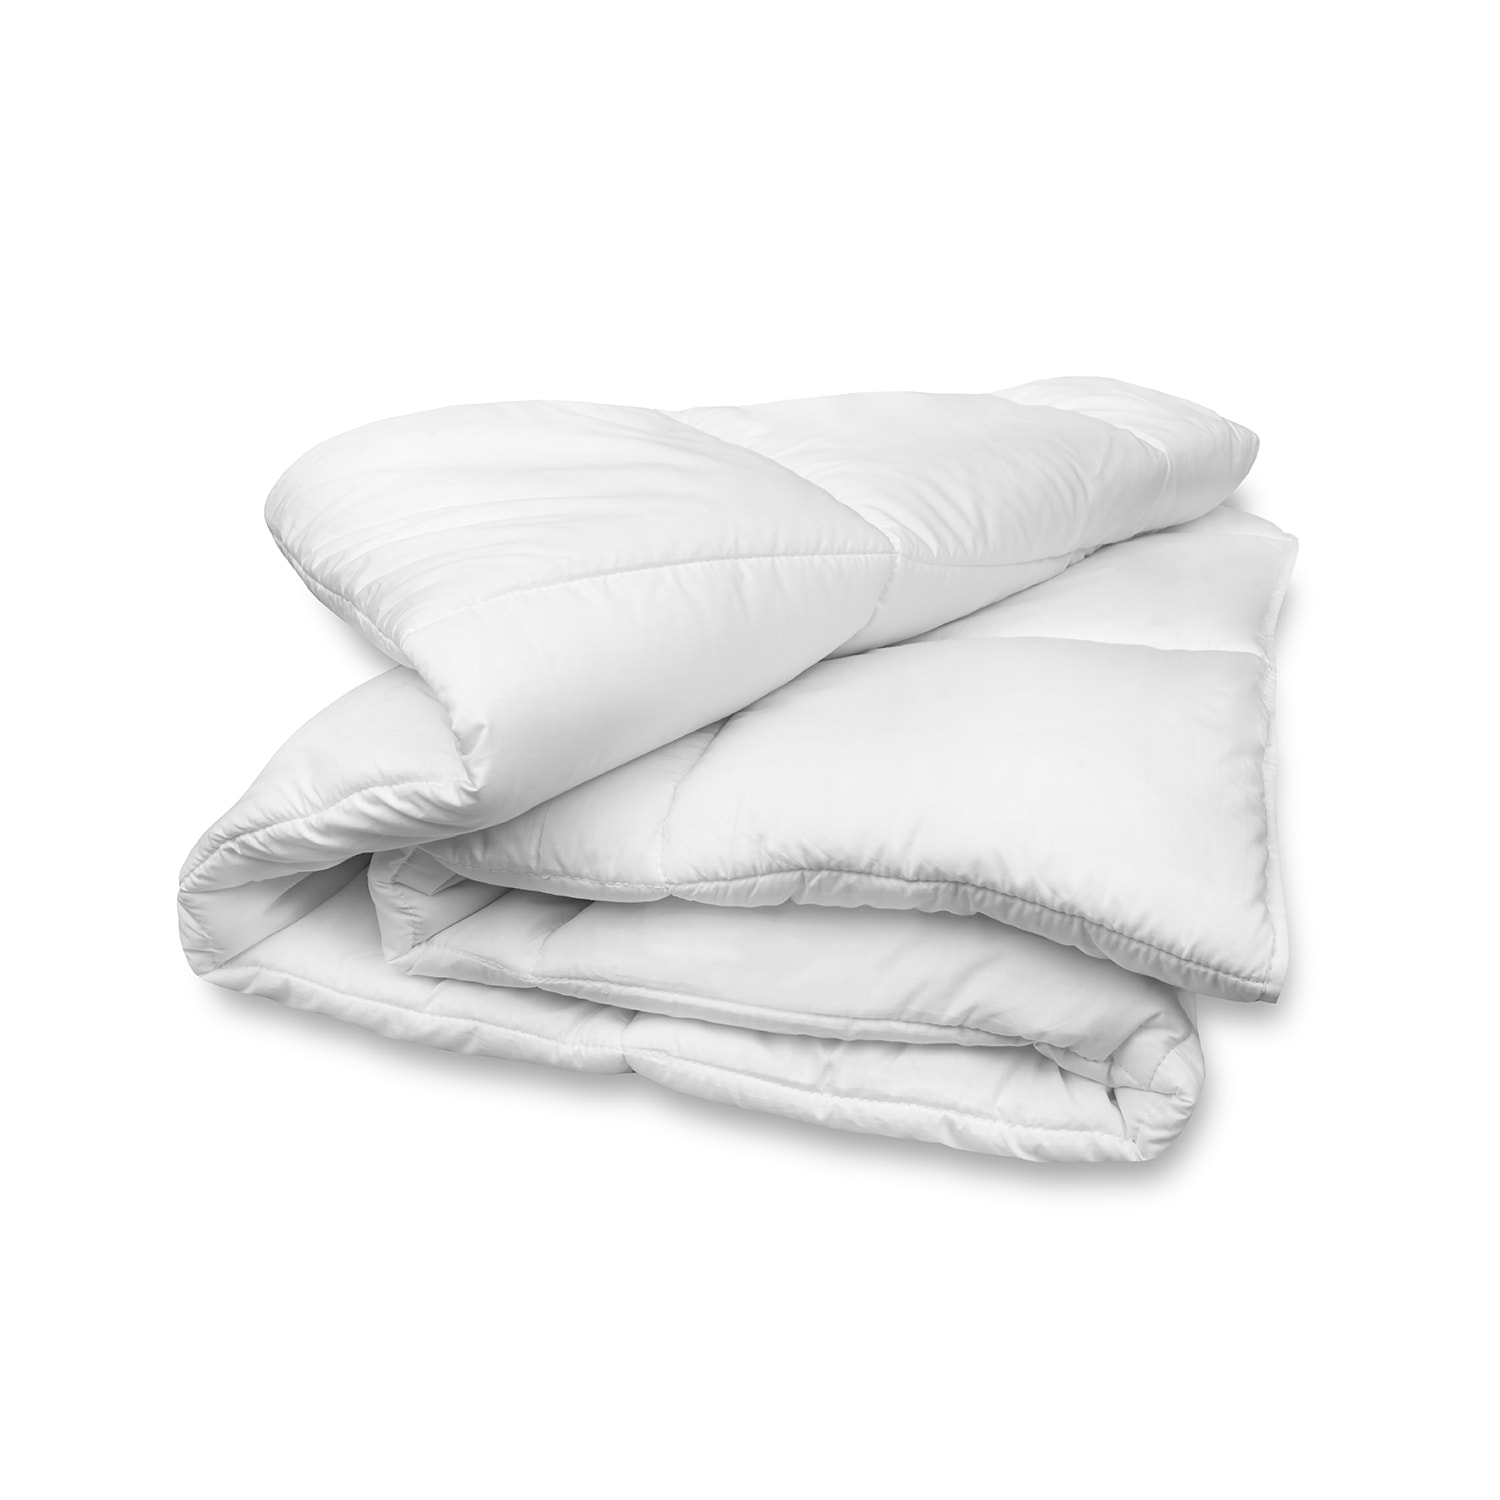 Biodegradable sustainable duvet , degrades in ocean water and landfill